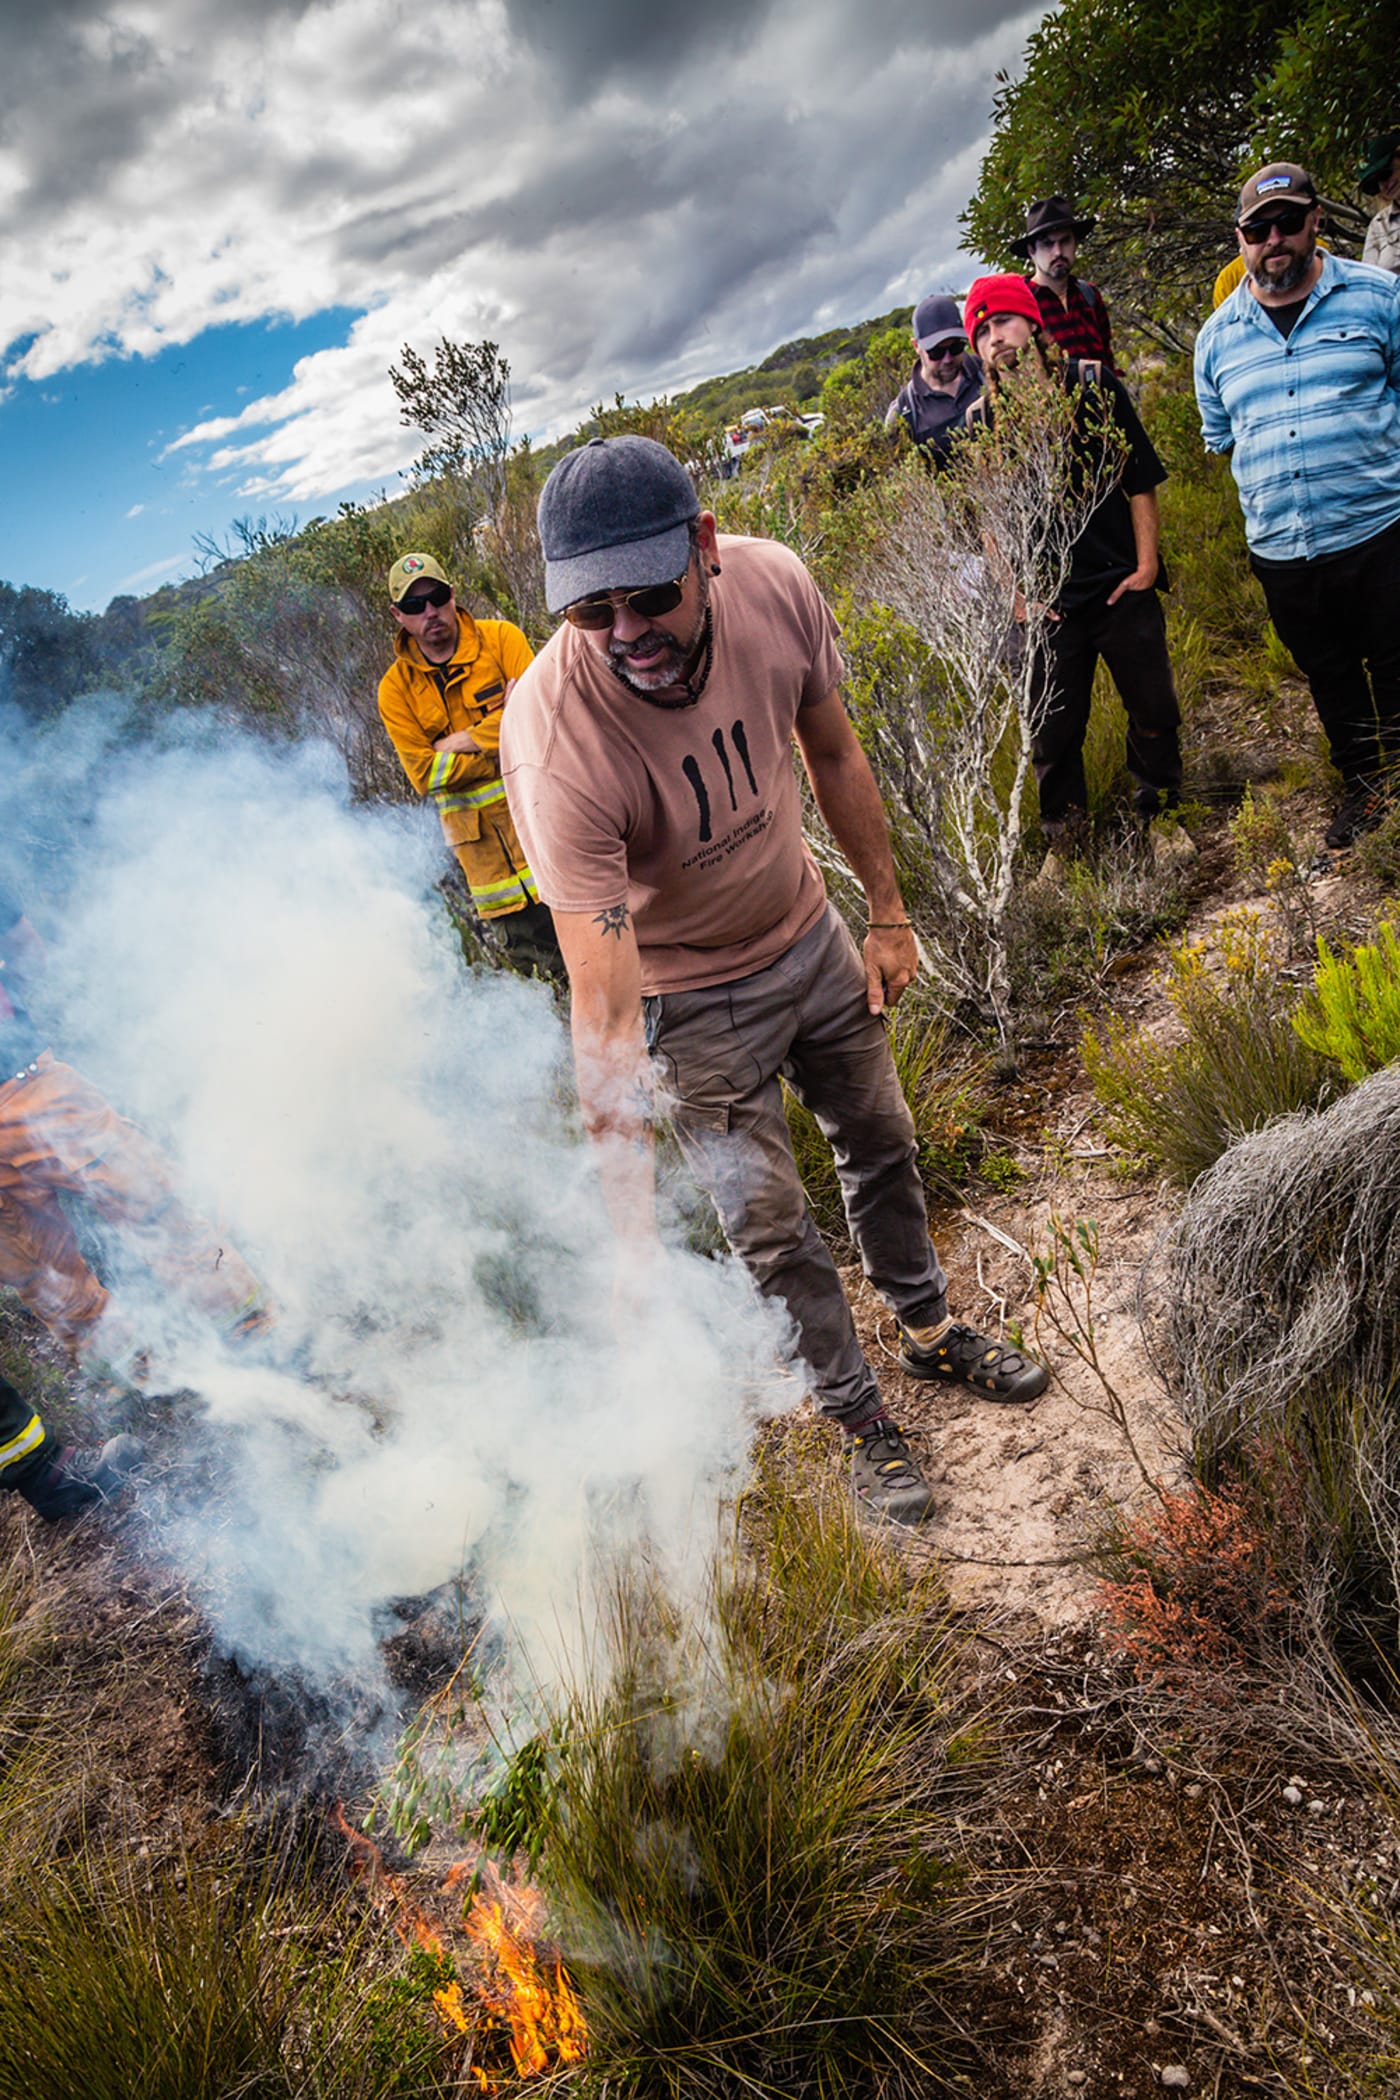 Tagalaka man and Firesticks Alliance Indigenous Corporation’s Lead Fire Practitioner Victor Steffensen sharing his cultural burning knowledge.